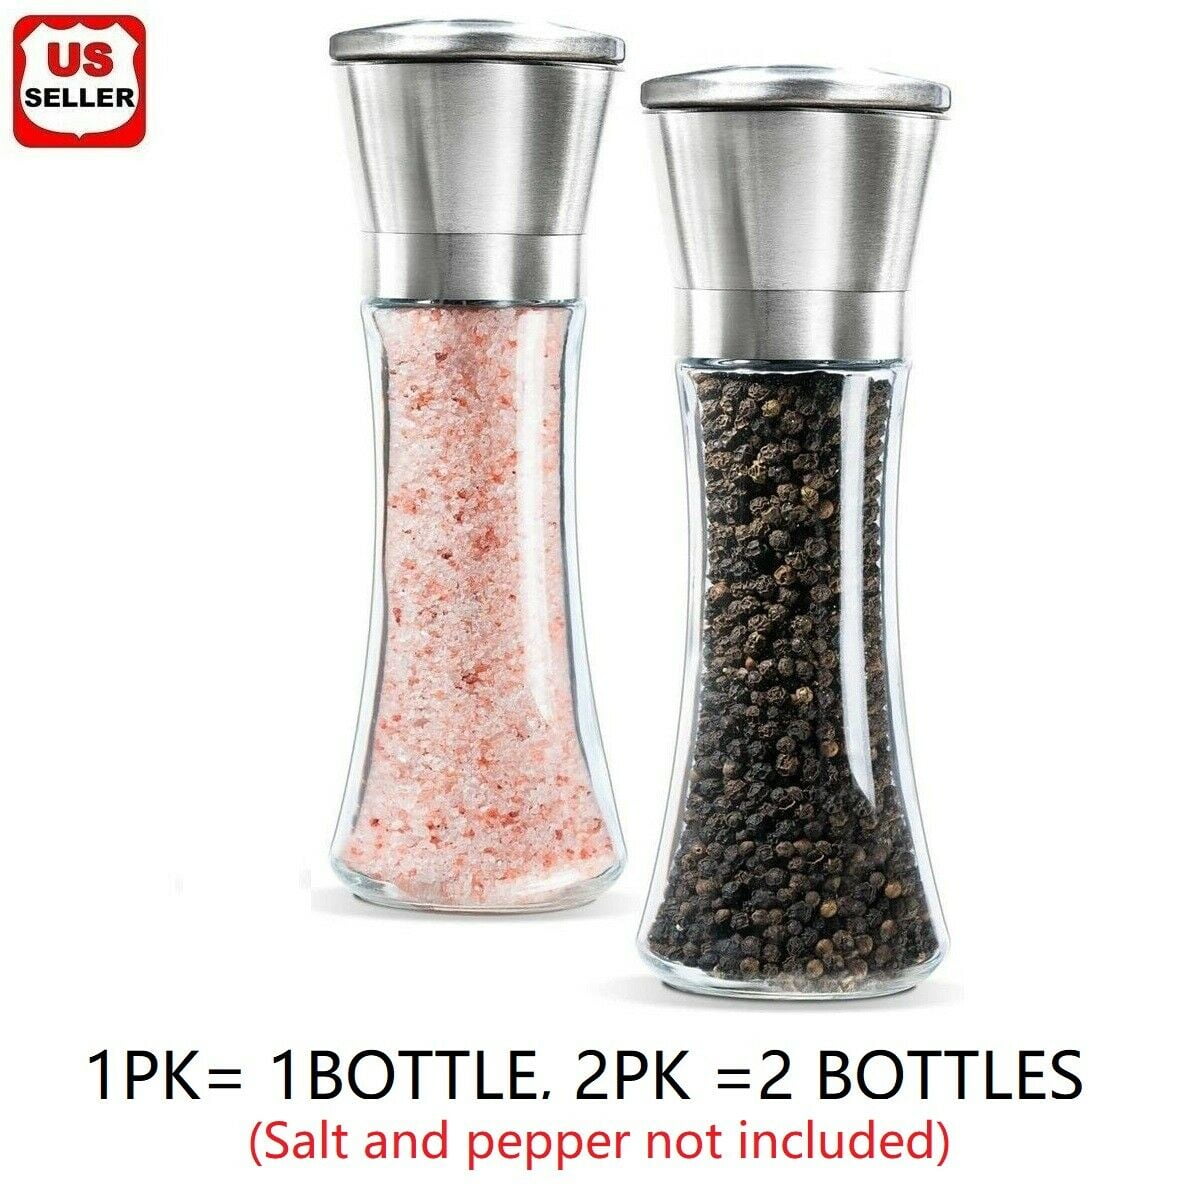 Brushed Stainless Steel Glass Body Shakers Wuyue Hua Premium Salt and Pepper Grinder Set with Adjustable Ceramic Coarseness Salt and Pepper Mills with Holder